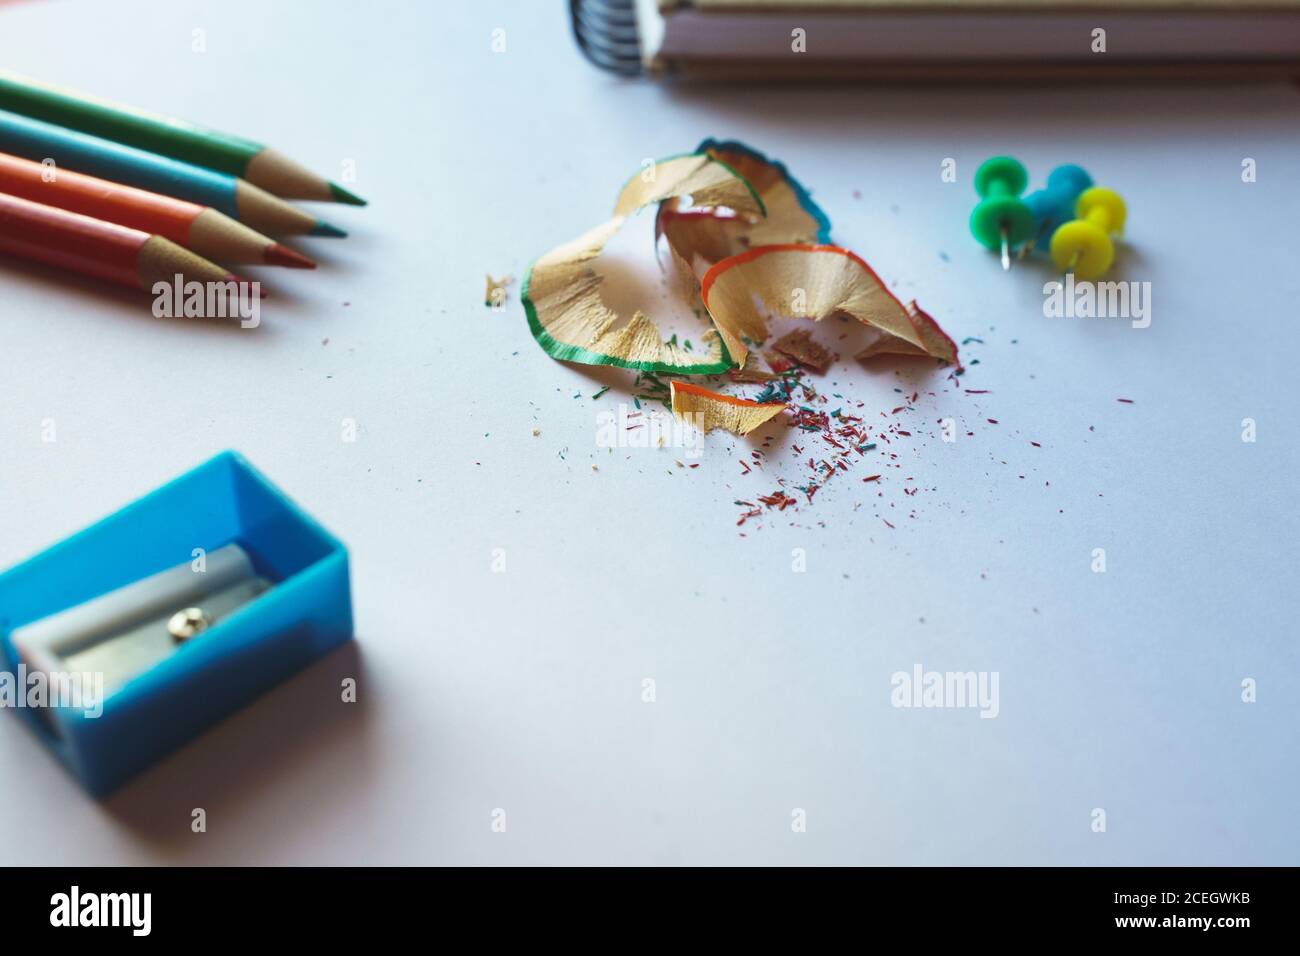 Closeup shot of different school supplies on a white surface Stock Photo